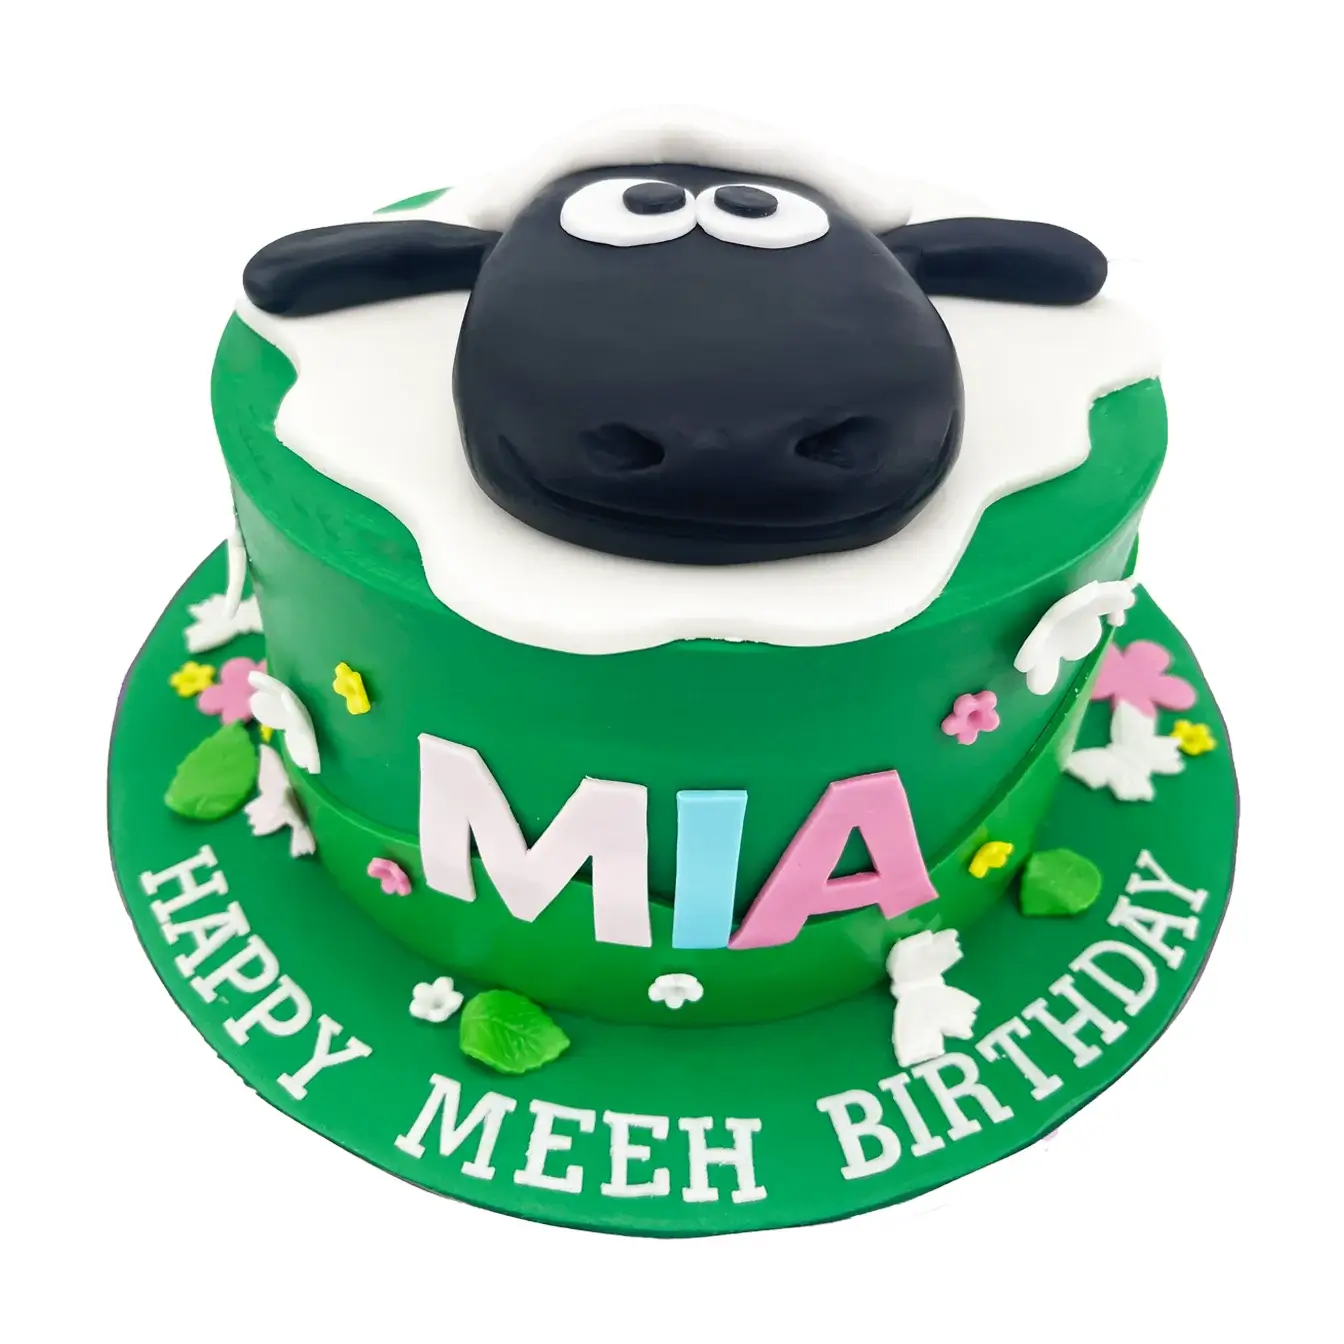 Shaun the Sheep Cake: Green Fondant with Cutout Flowers and Sheep Head Topper